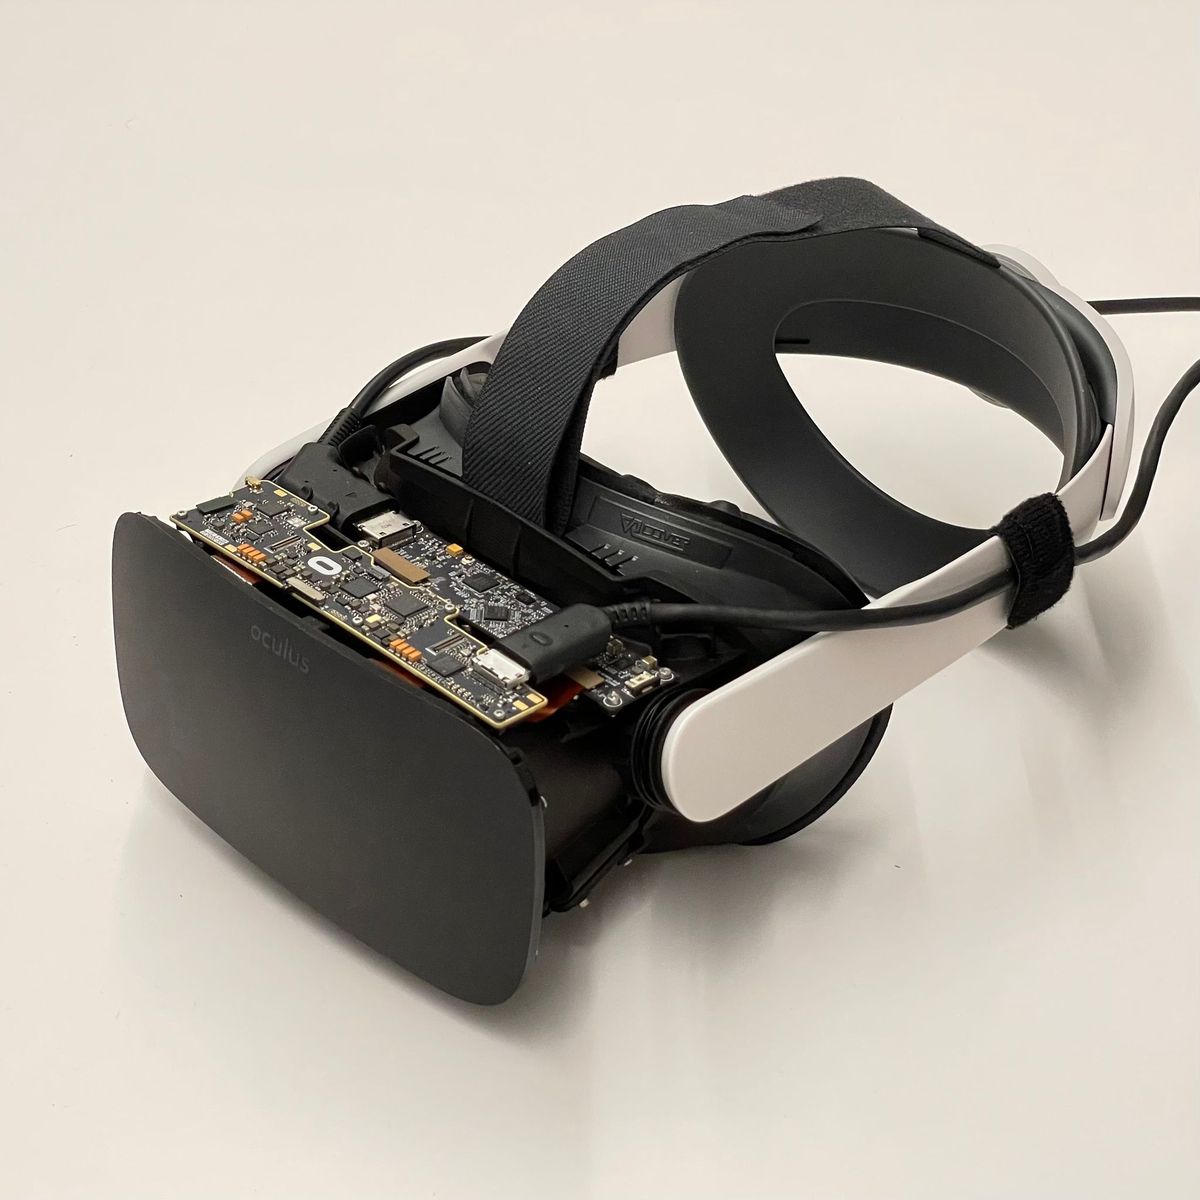 A black vr headset with a custom high-resolution screen.